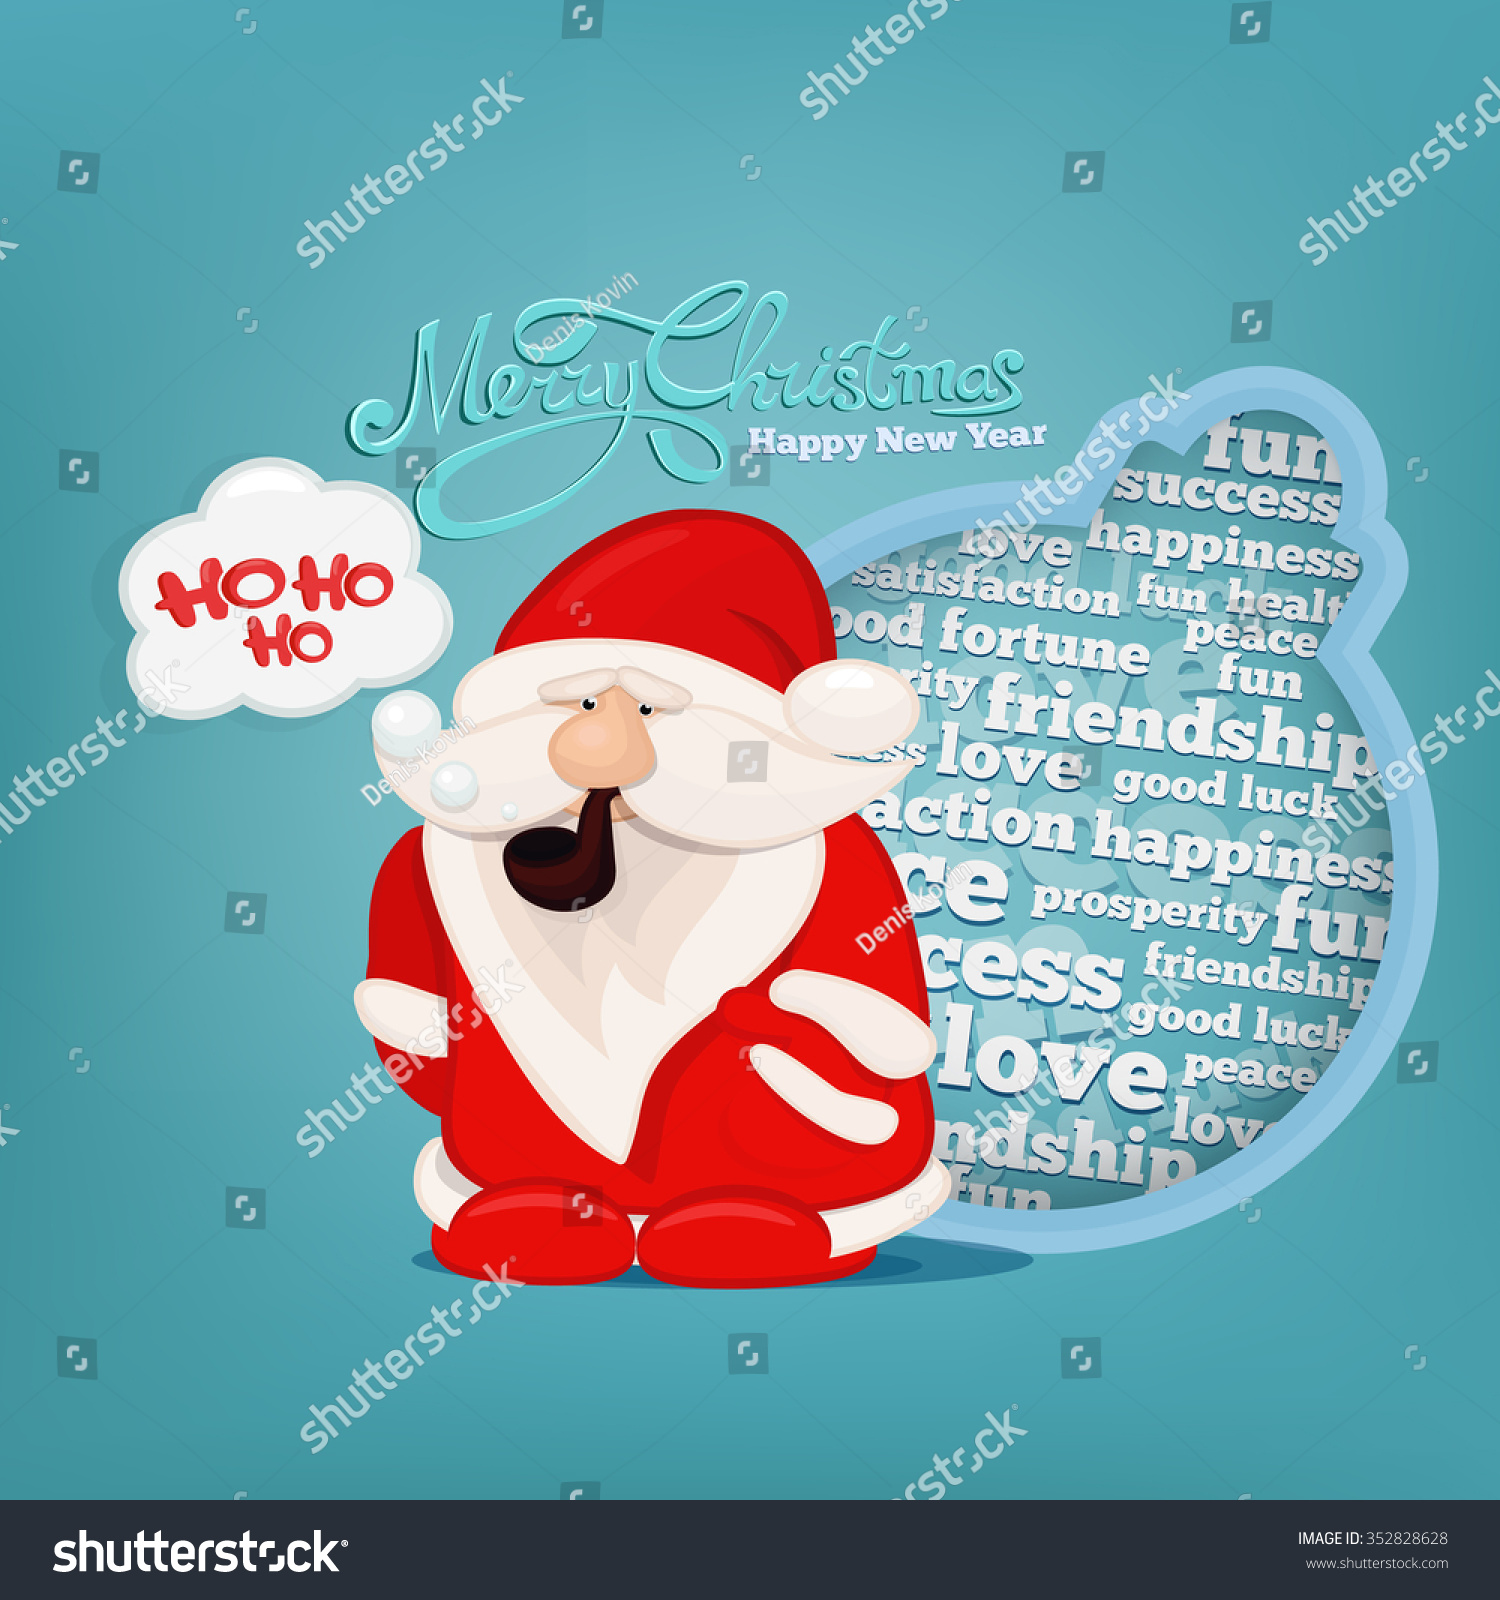 New year card with Santa Claus and Merry Christmas lettering Good wishes template concept